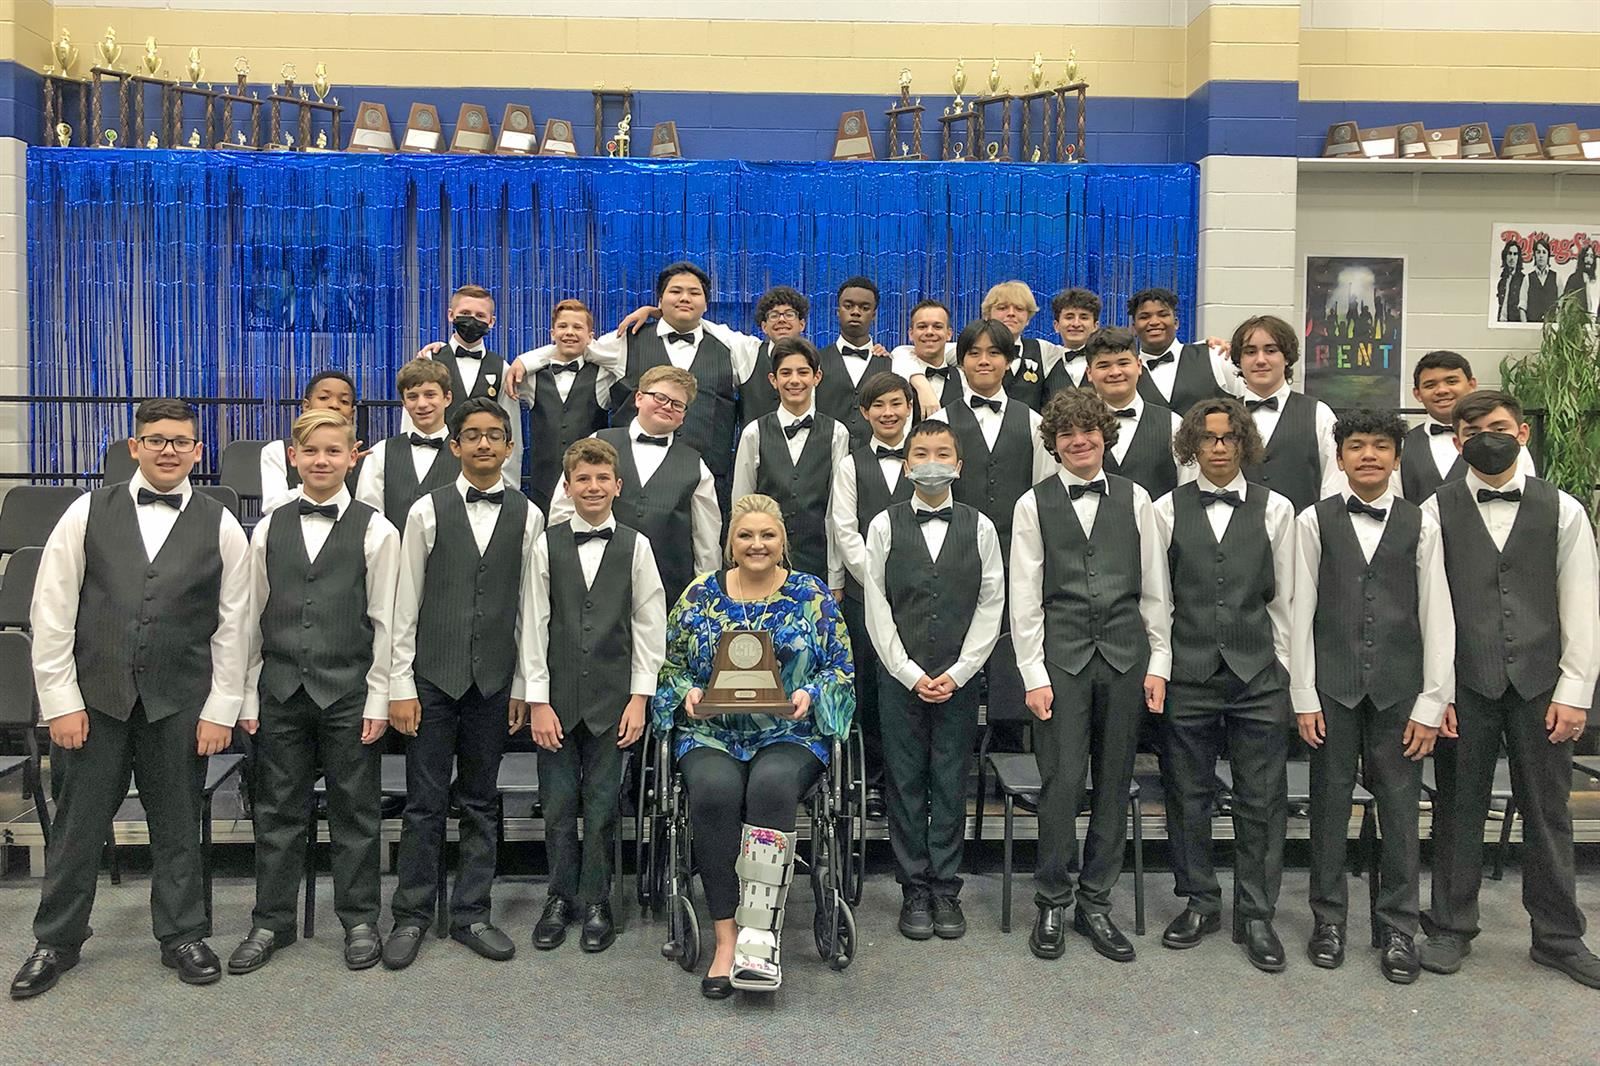 The Spillane tenor/bass choir, directed by Nicole Bouley, was named a National Winner in the Mark of Excellence awards.